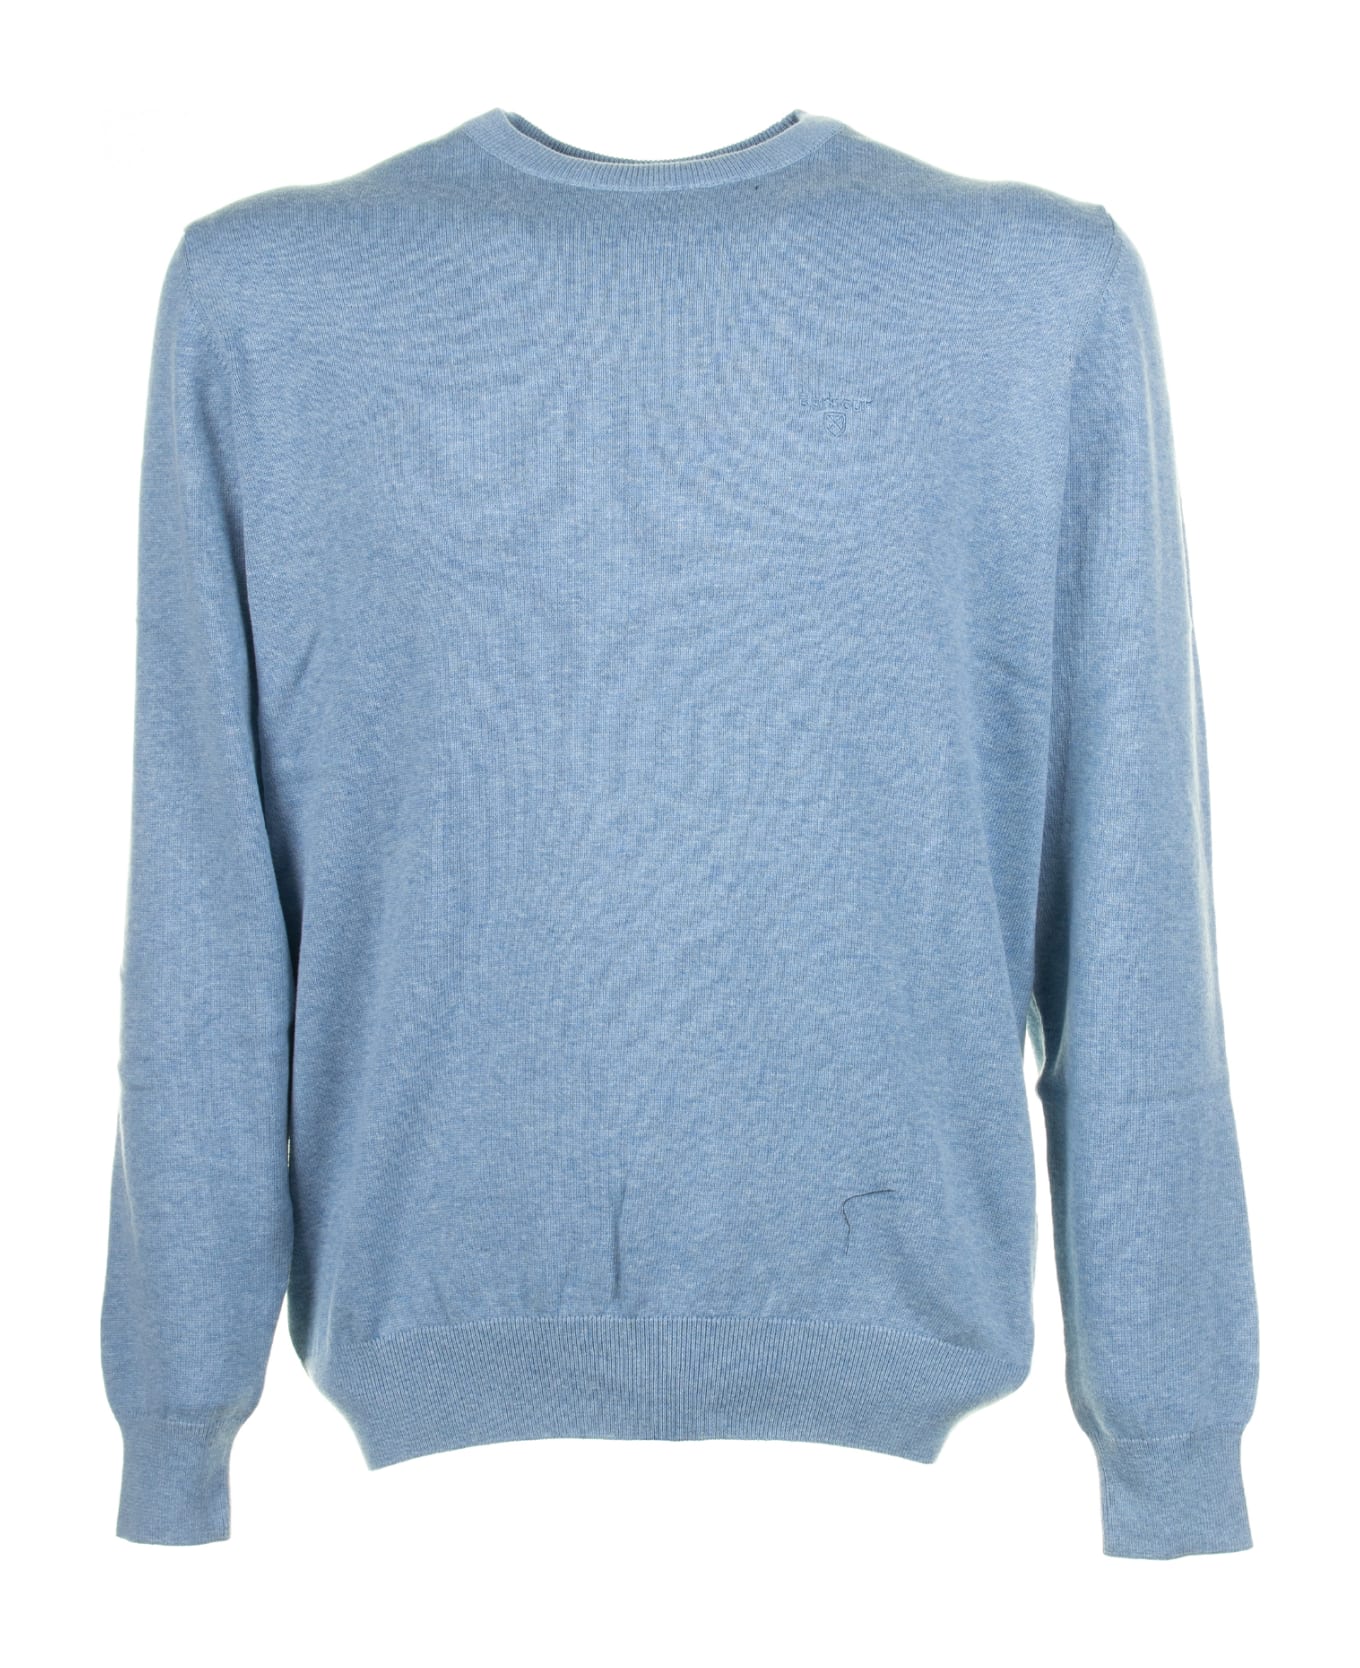 Barbour Light Blue Crew Neck Sweater - DK CHAMBRAY